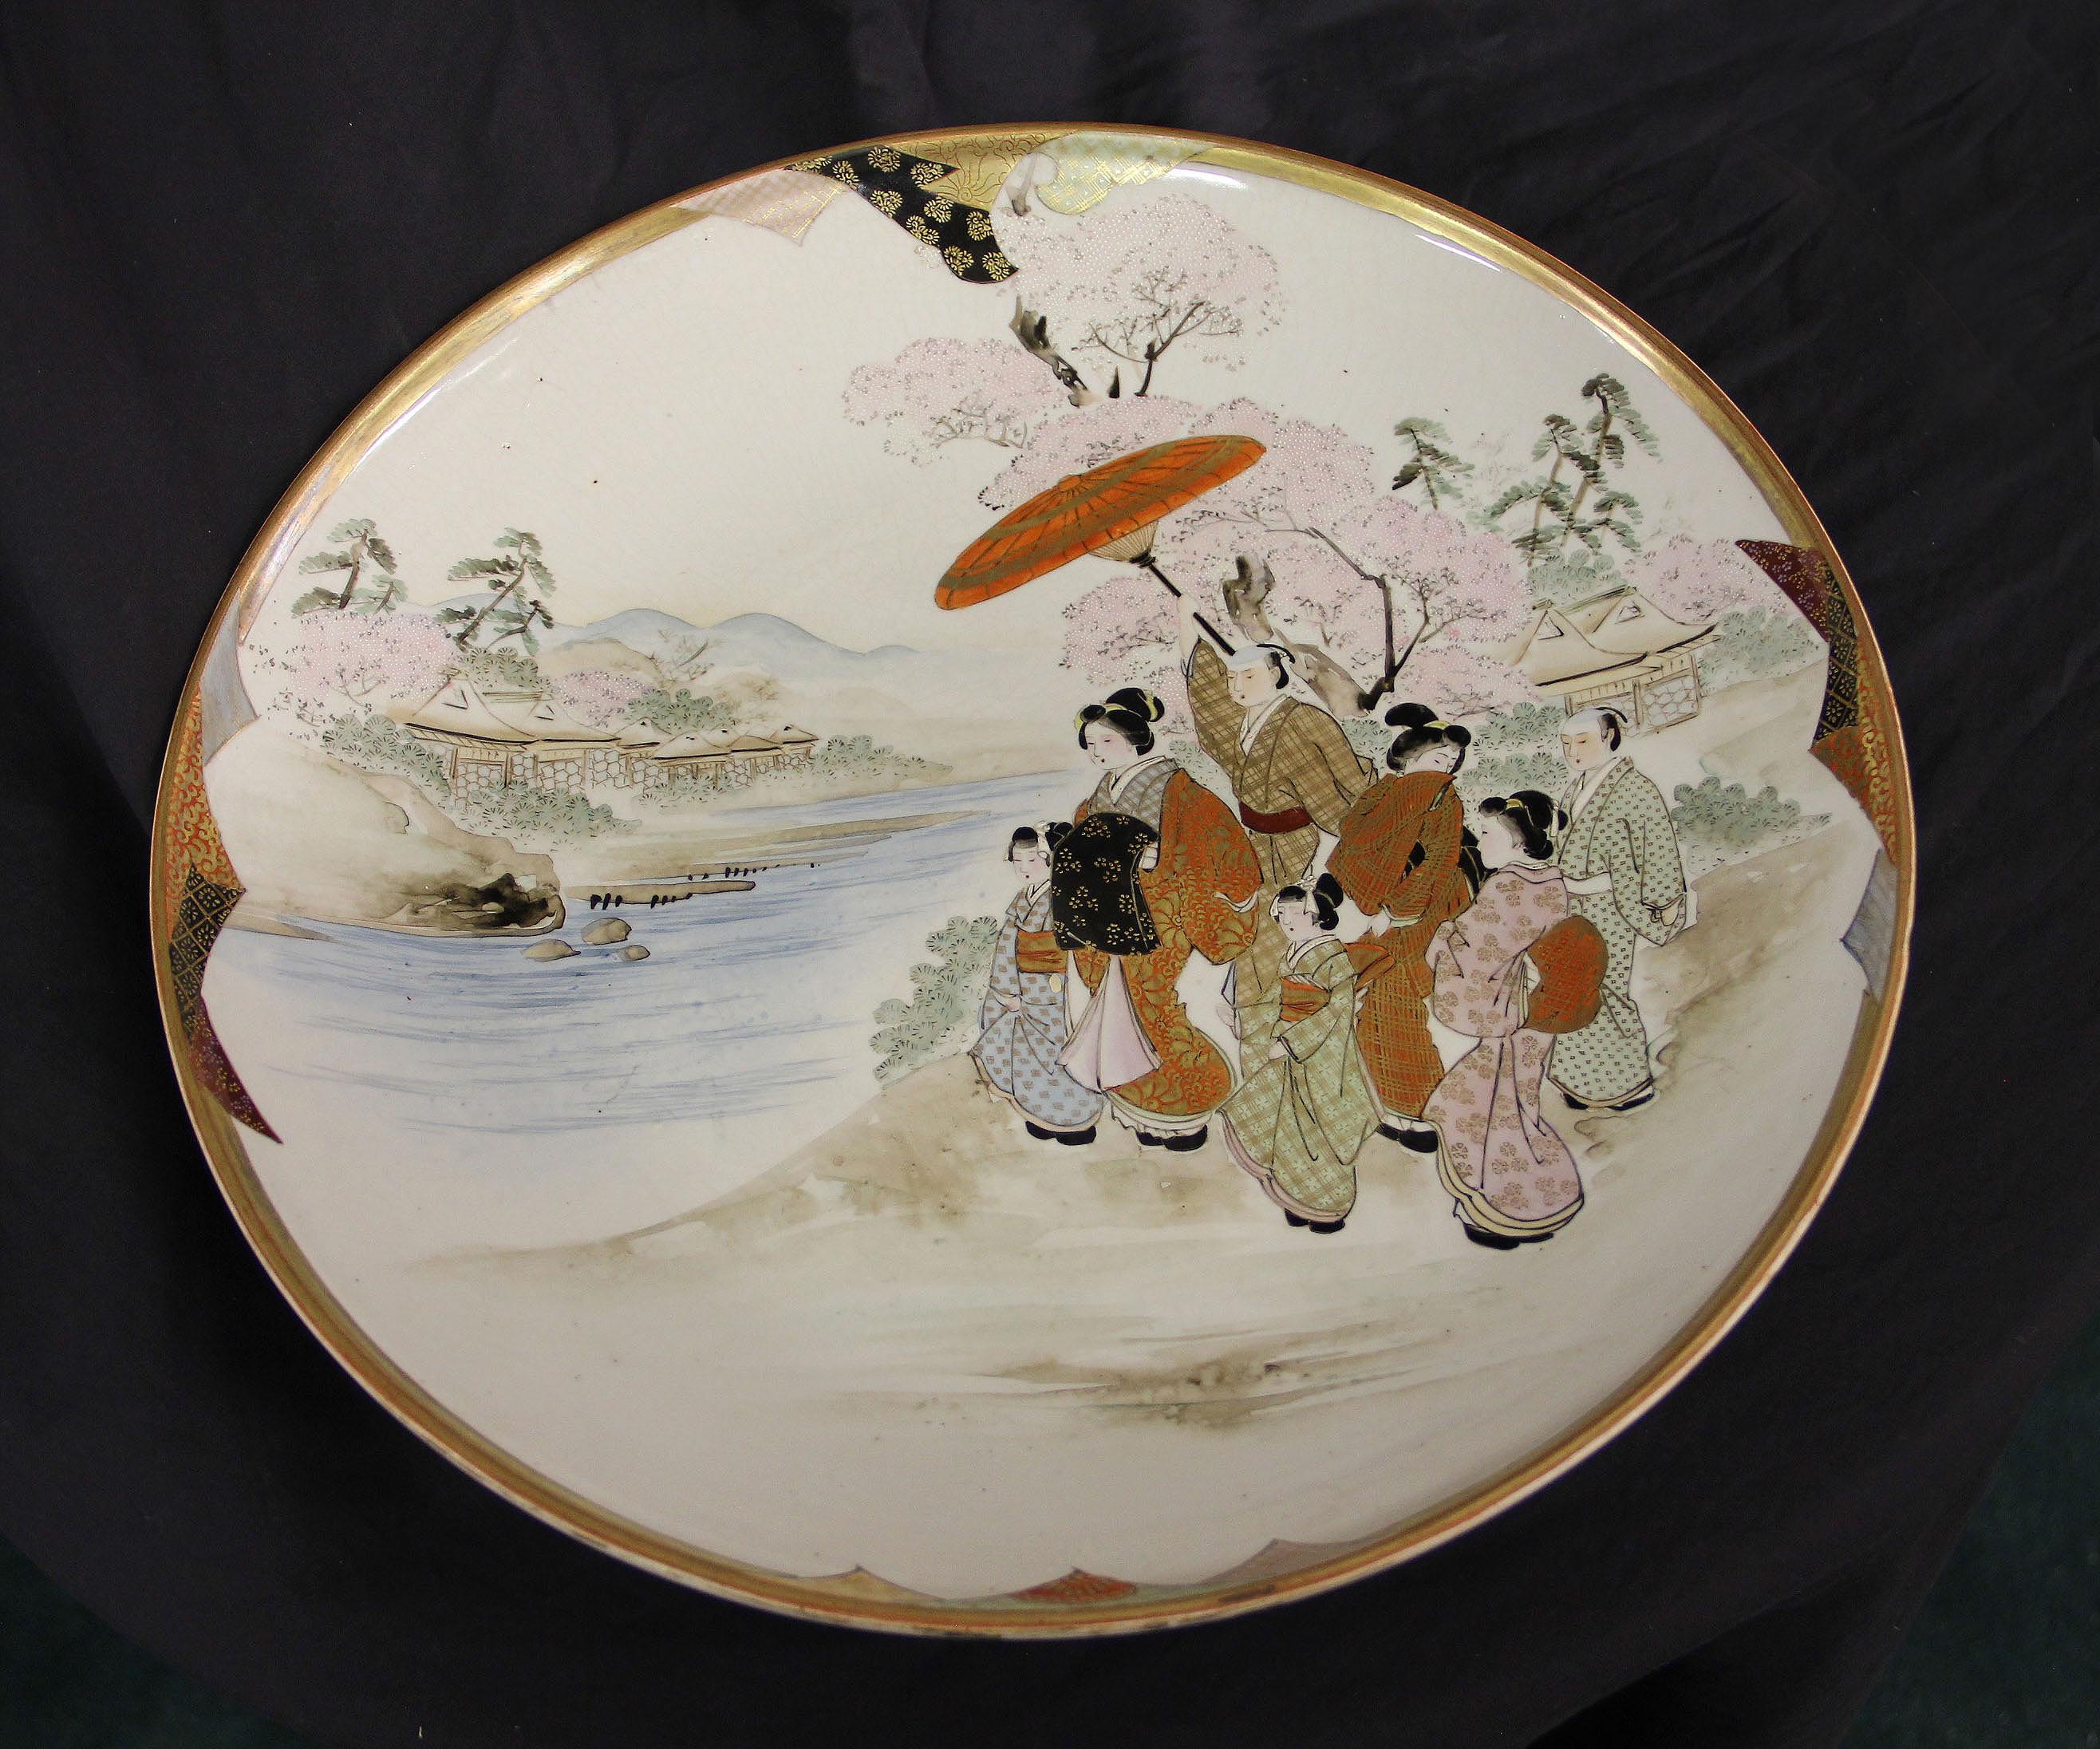 A nice pair of early 20th century Japanese Kutani plates

These highly decorated plates depict a family standing by a river and a village, with raised gilt and painted designs.

Kutani ware (??? Kutani-yaki) is a style of Japanese porcelain